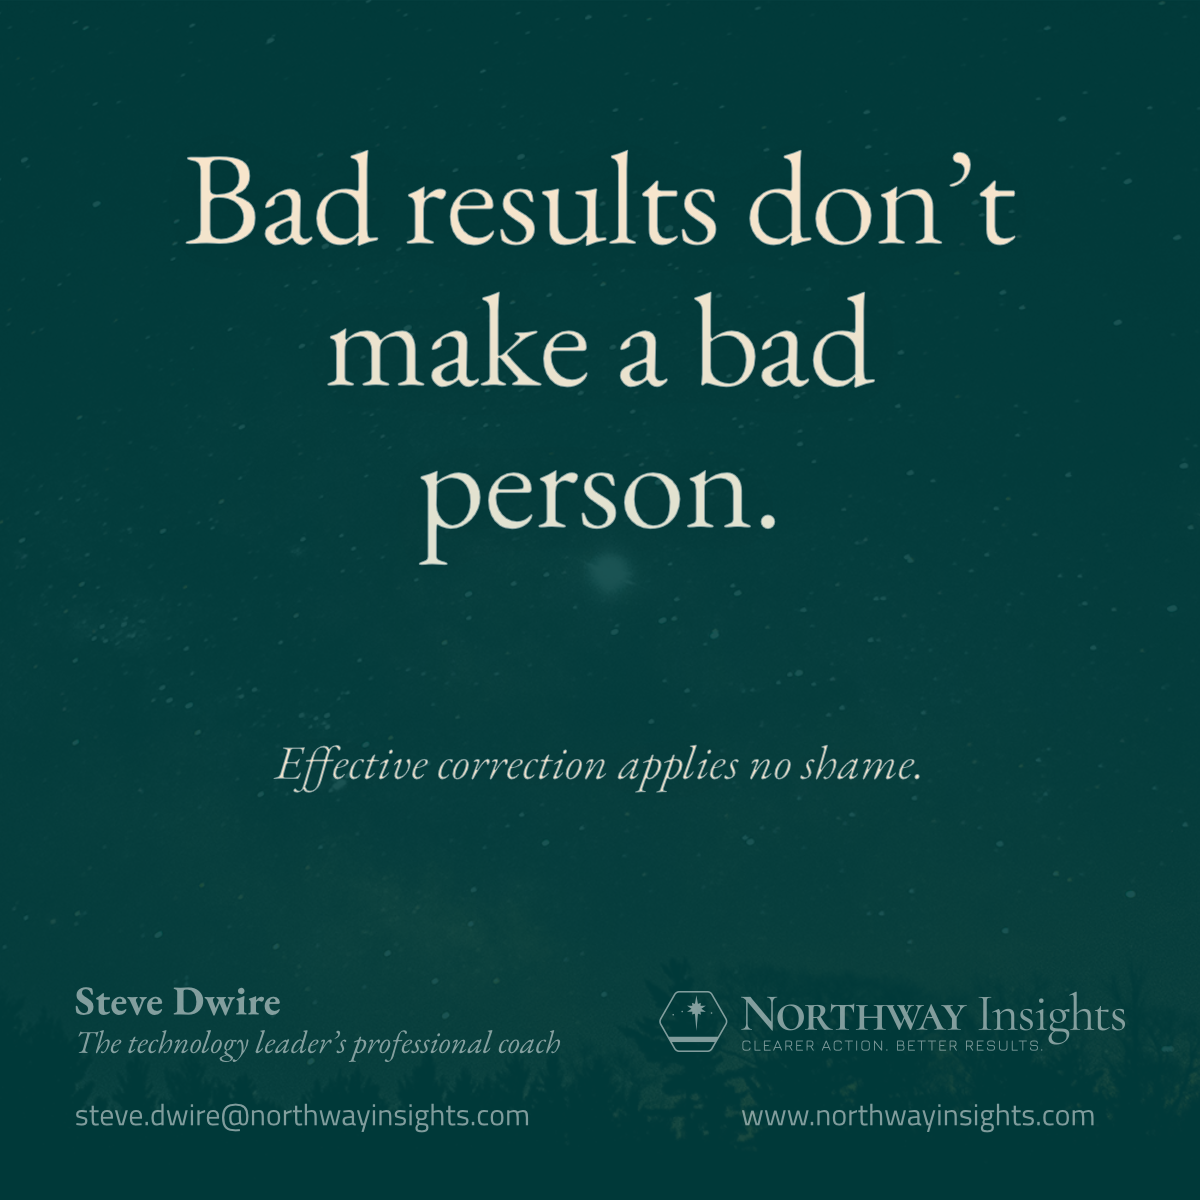 Bad results don't make a bad person. (Effective correction applies no moral or ethical judgment.)